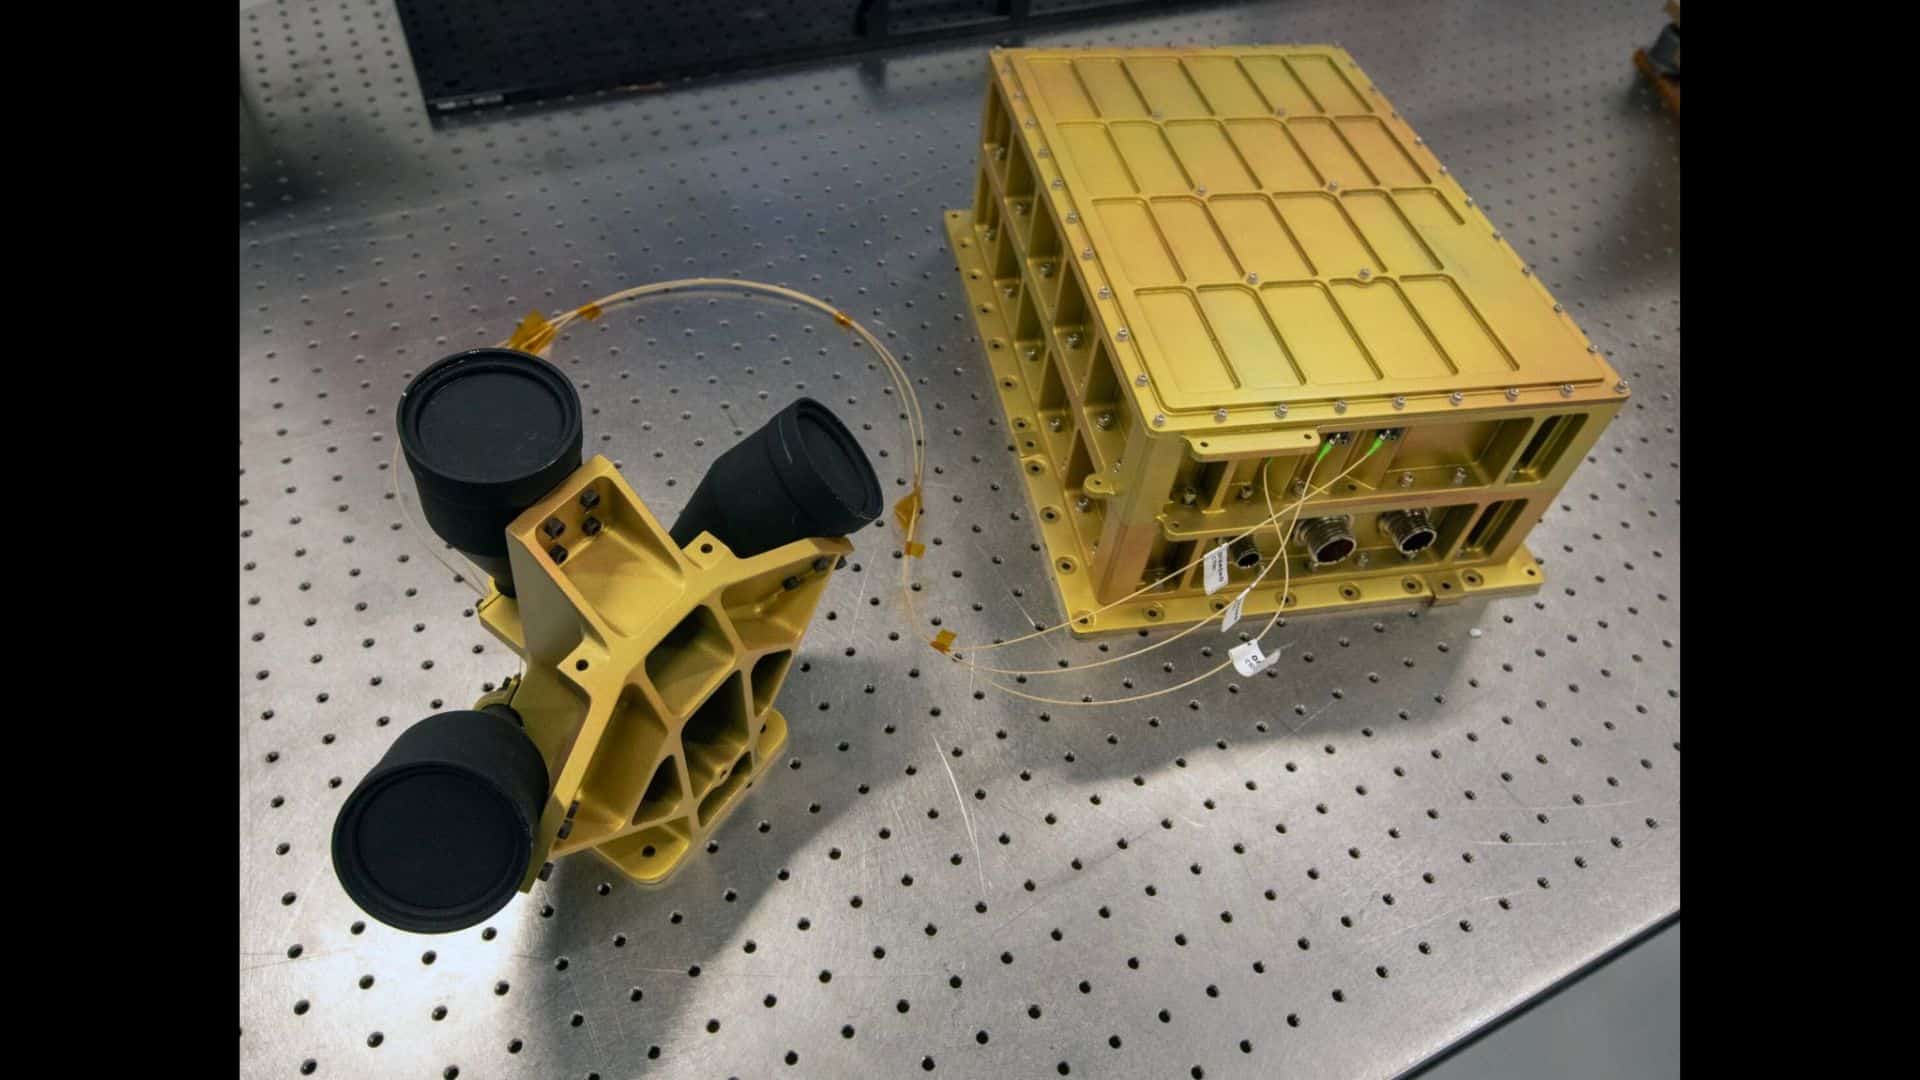 NASA’s Navigation Doppler Lidar instrument (NDL) is composed of an optical head with three small telescopes